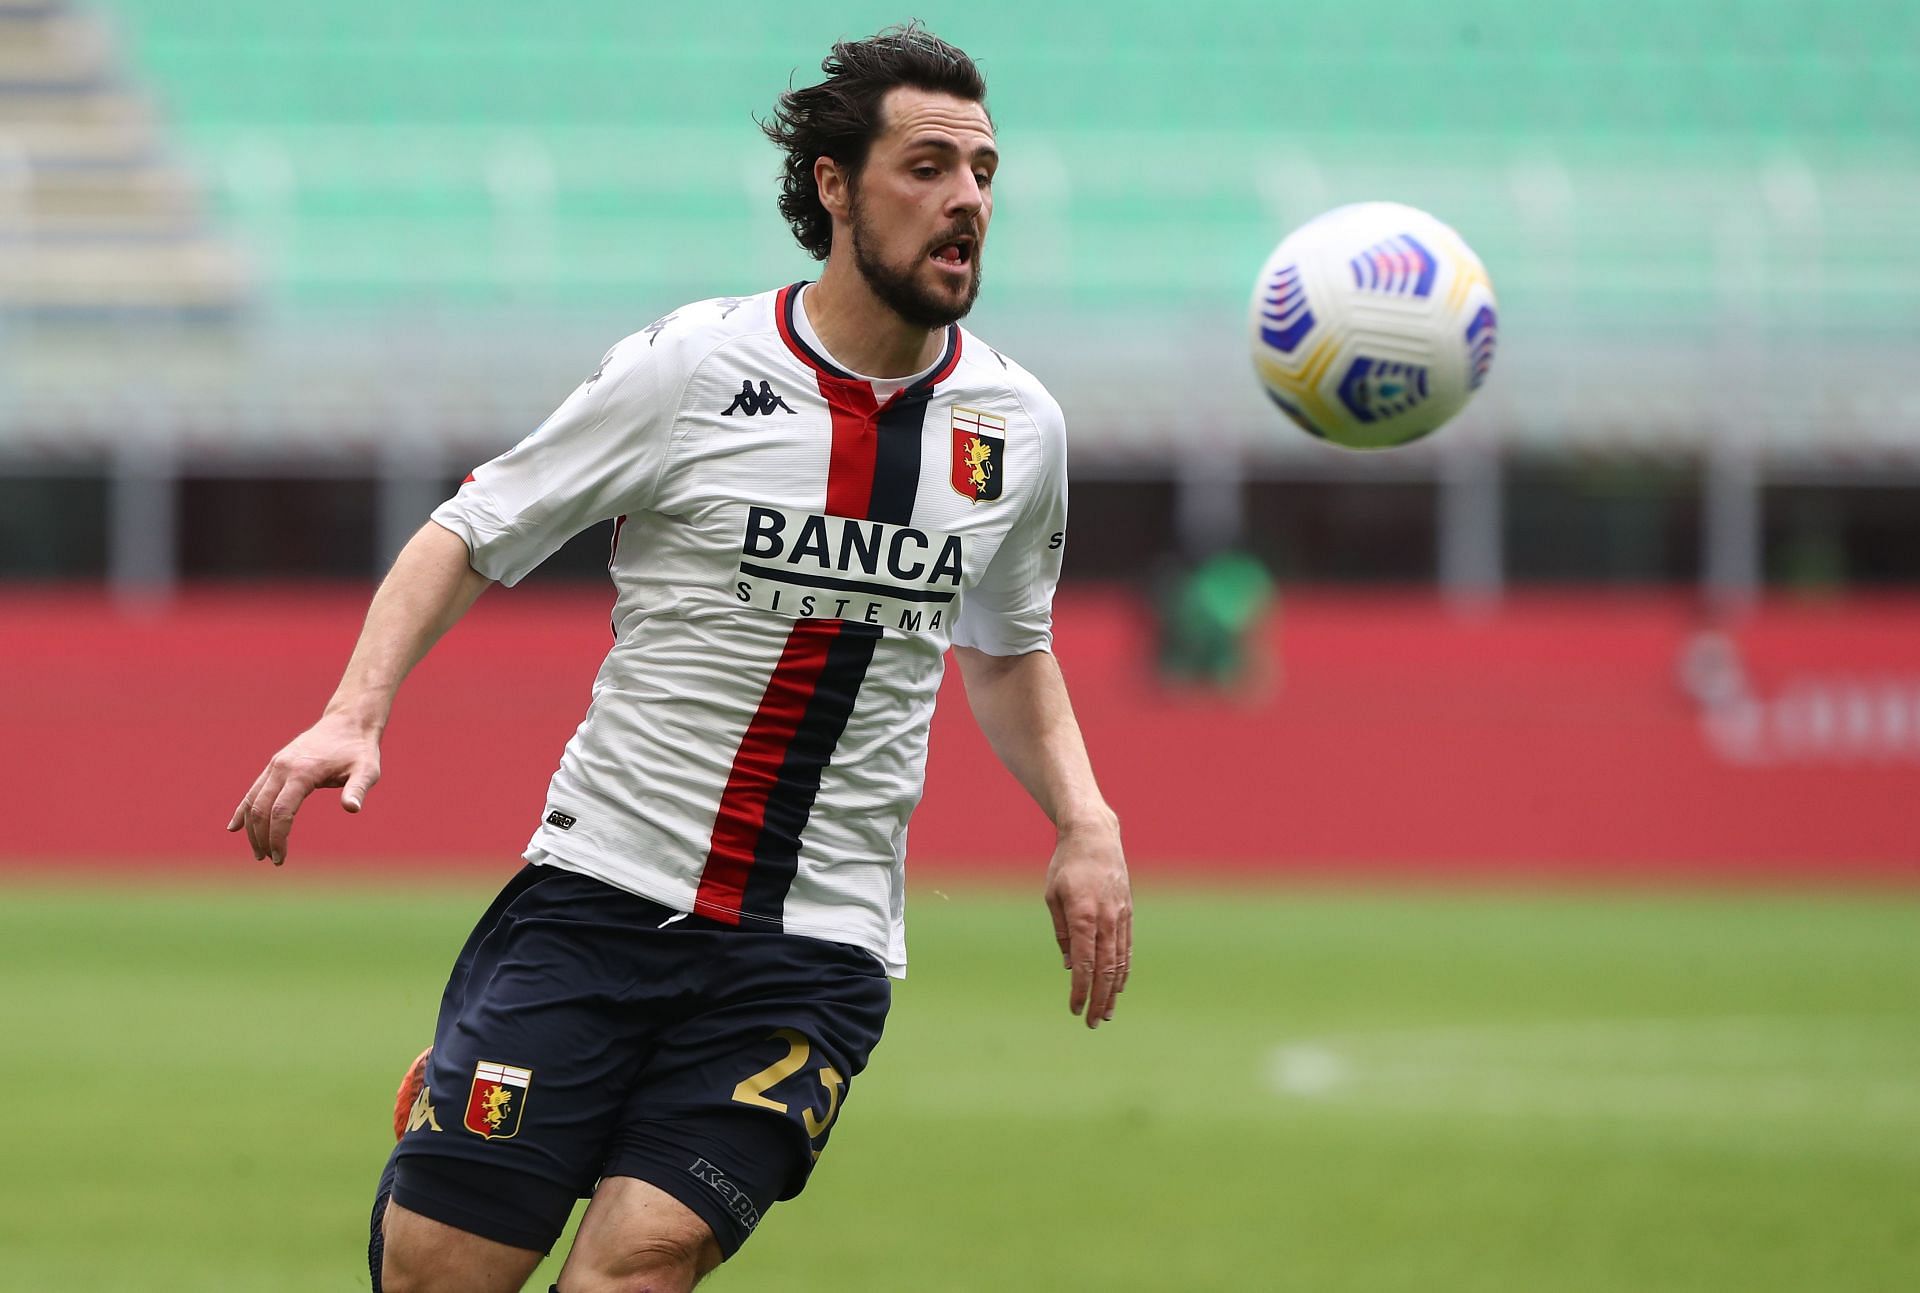 Destro will be a huge miss for Genoa